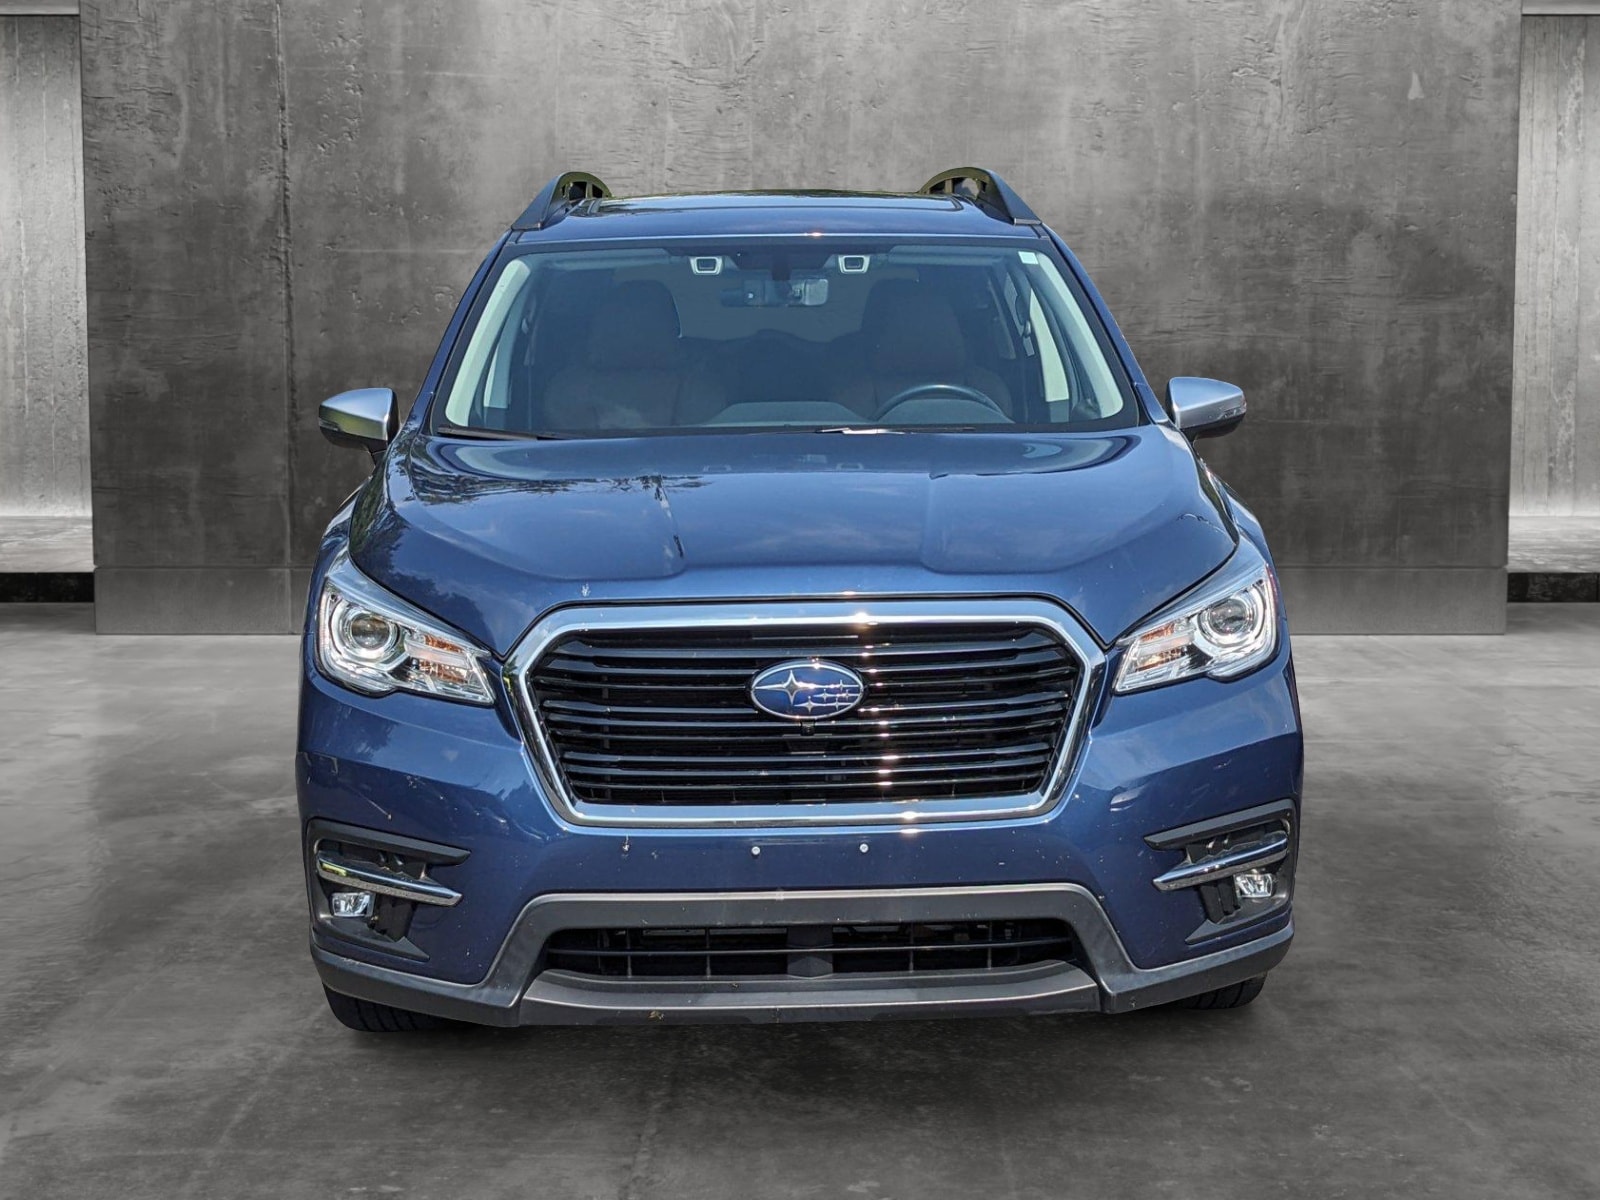 Used 2019 Subaru Ascent Touring with VIN 4S4WMARD1K3400205 for sale in Des Plaines, IL